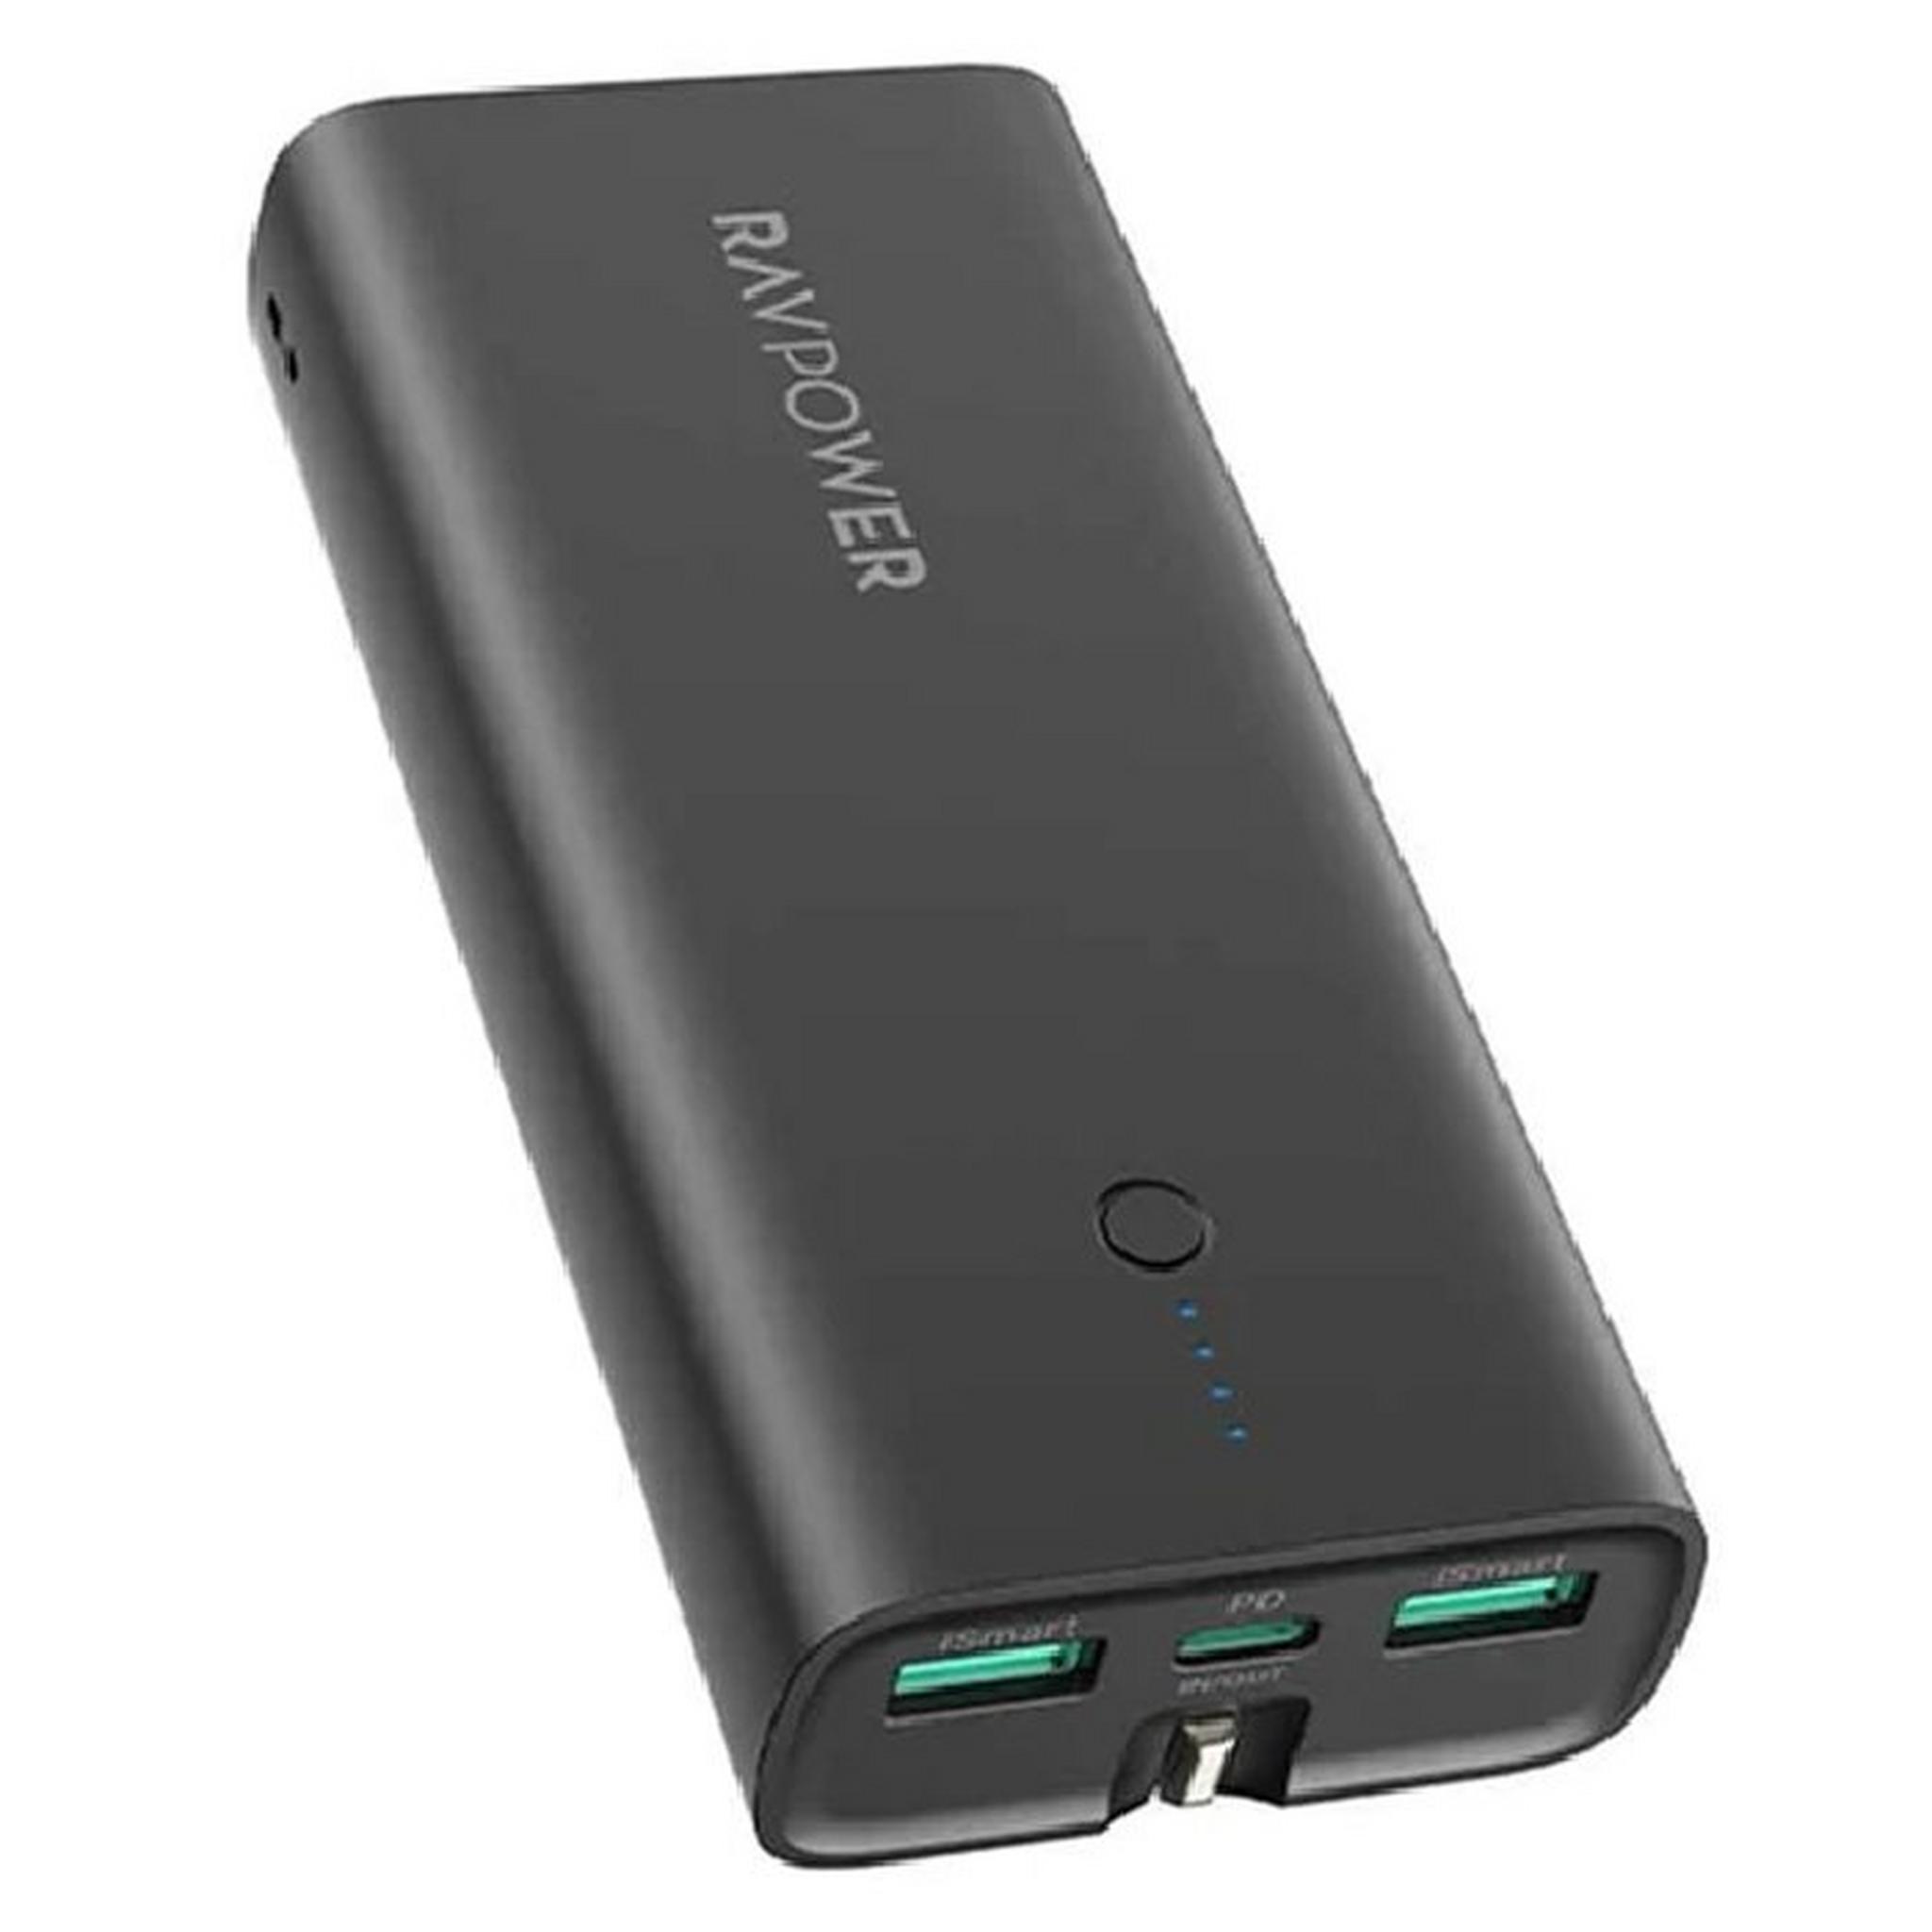 Ravpower 2 in 1 Power Bank with AC Adapter, 10000mAh, 20W, 3-Ports, PB243 - Black